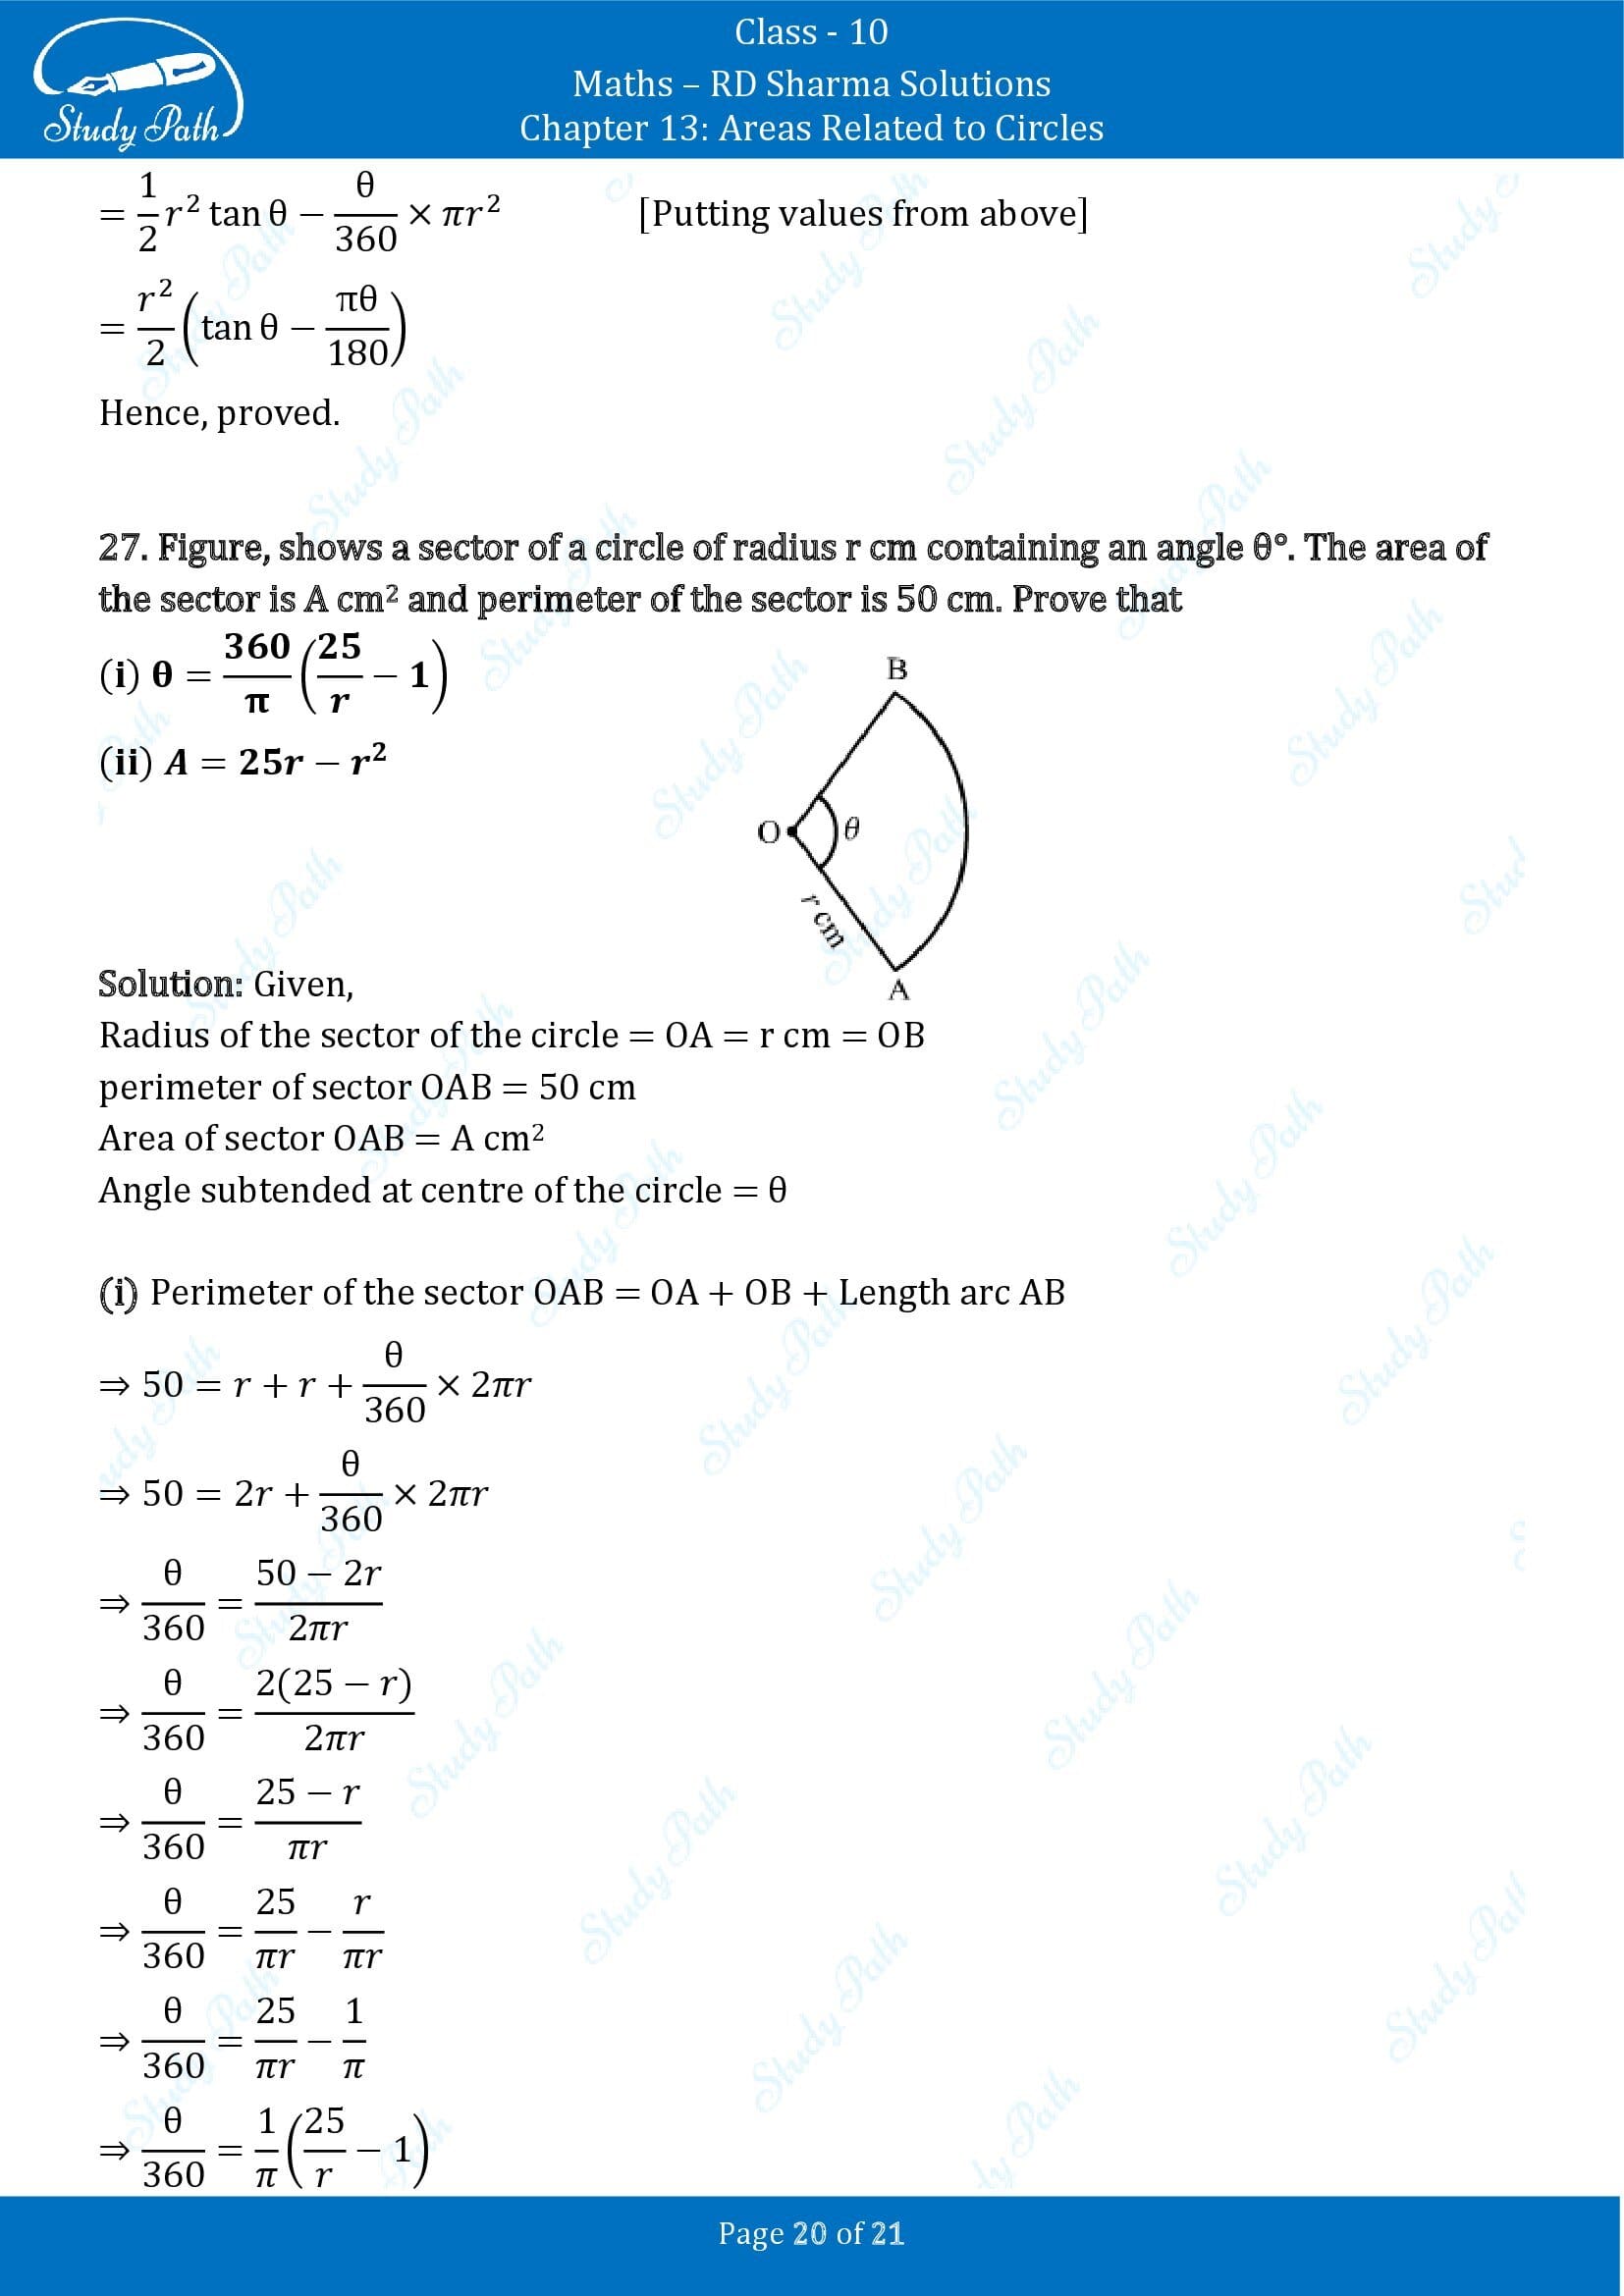 RD Sharma Solutions Class 10 Chapter 13 Areas Related to Circles Exercise 13.2 00020